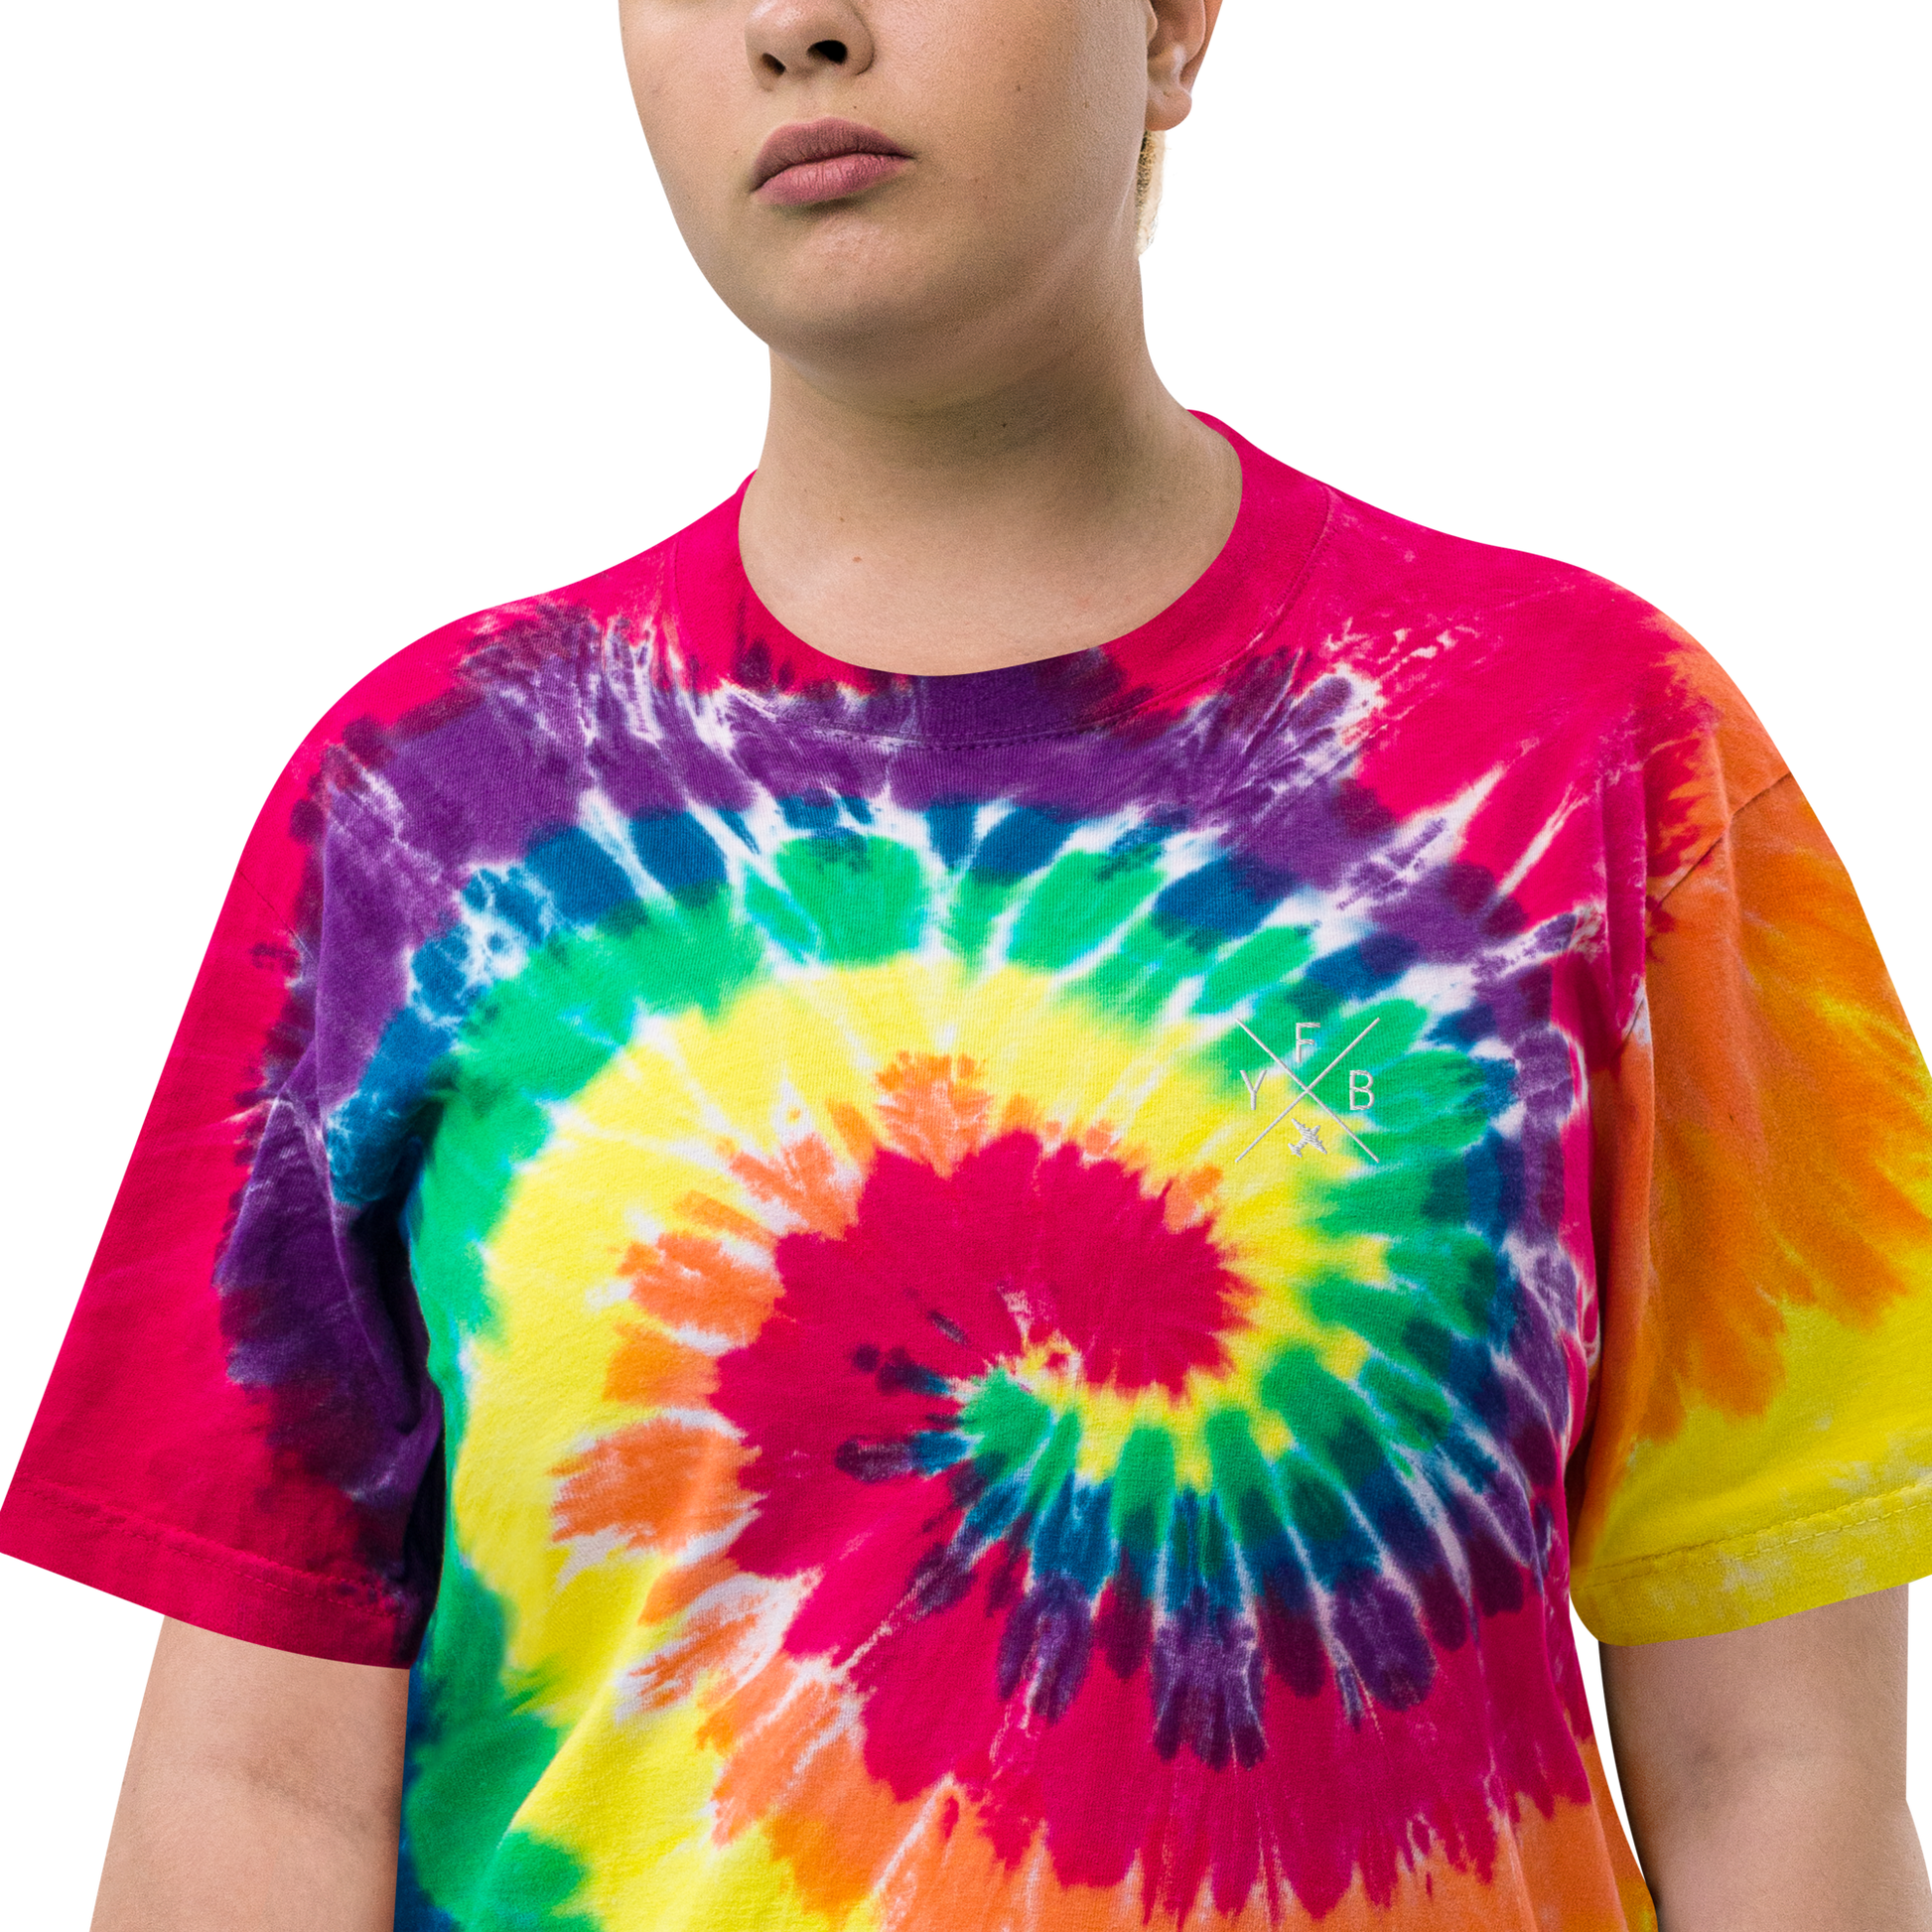 YHM Designs - YFB Iqaluit Oversized Tie-Dye T-Shirt - Crossed-X Design with Airport Code and Vintage Propliner - White Embroidery - Image 15